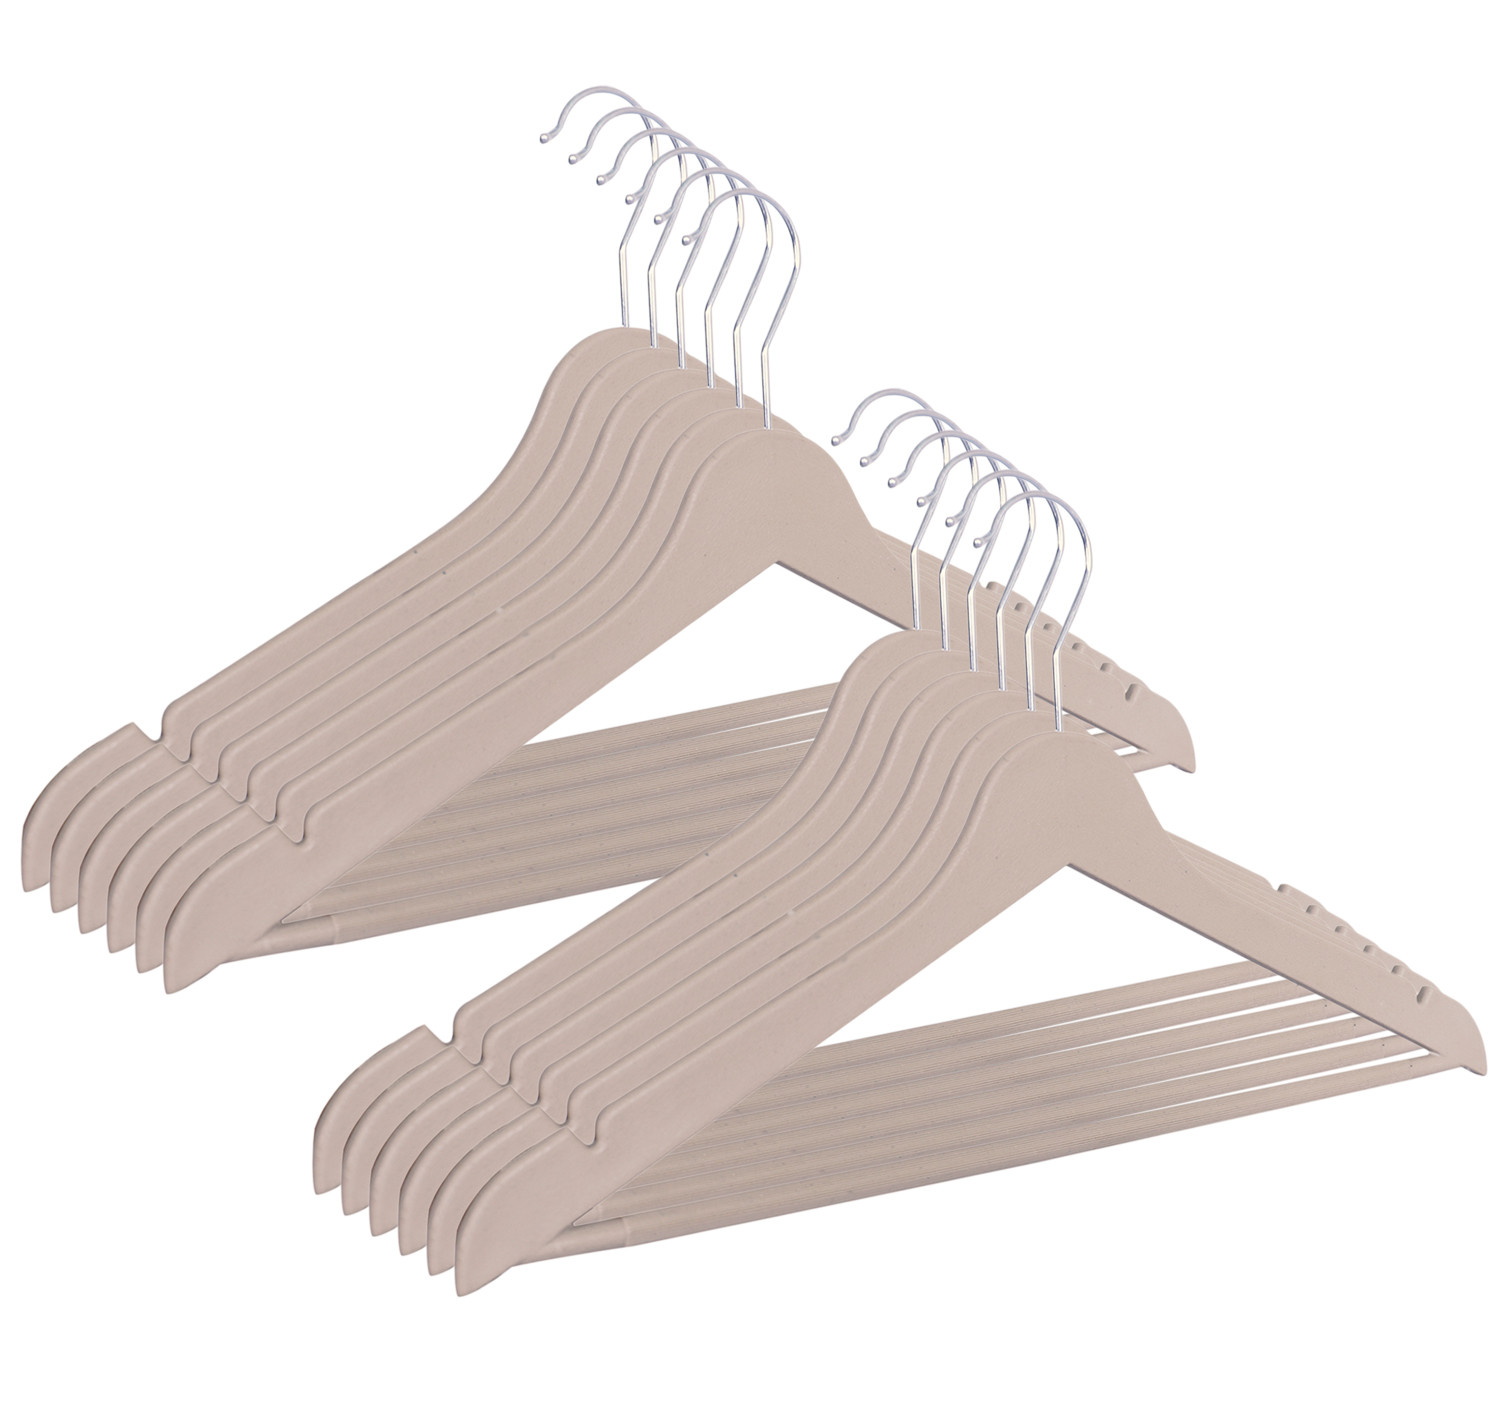 Kuber Industries Hanger|Durable & Lightweight Coat and Clothes Hangers|Notches Wardrobe Organization With 360 Degree Swivel Hook|(Cream)